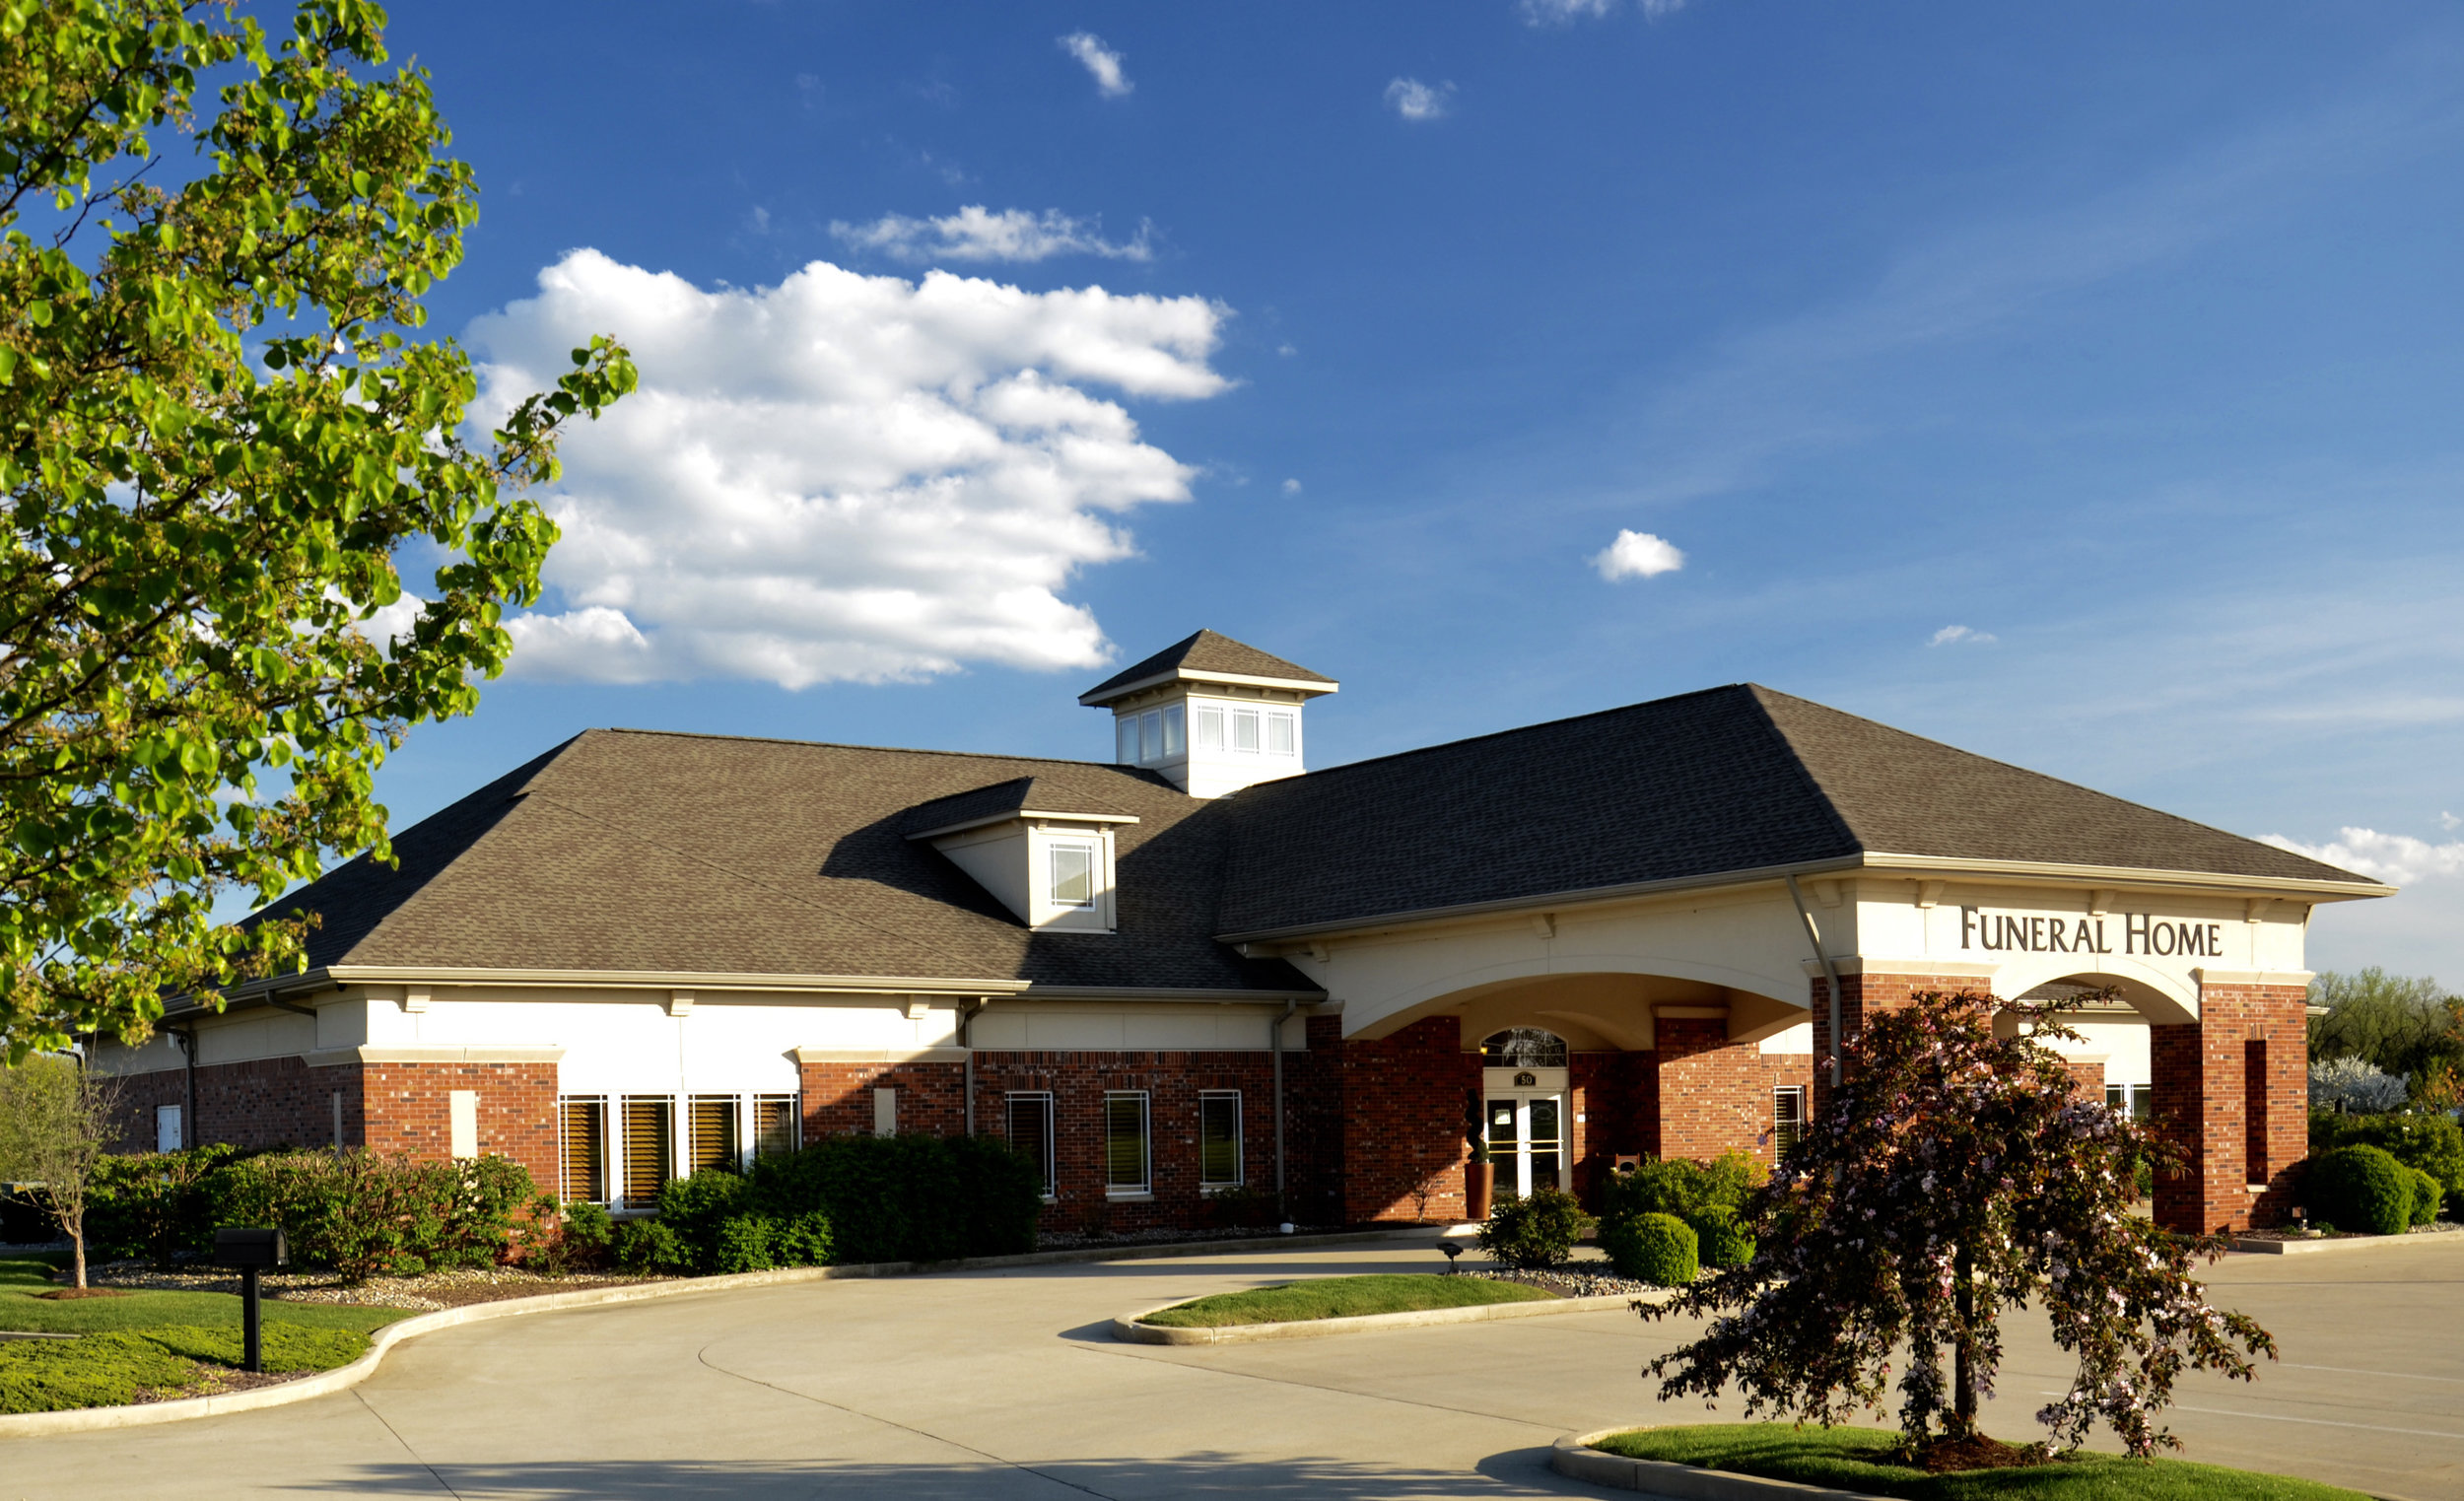 Sunset Hills Funeral Home Exterior (Copy)